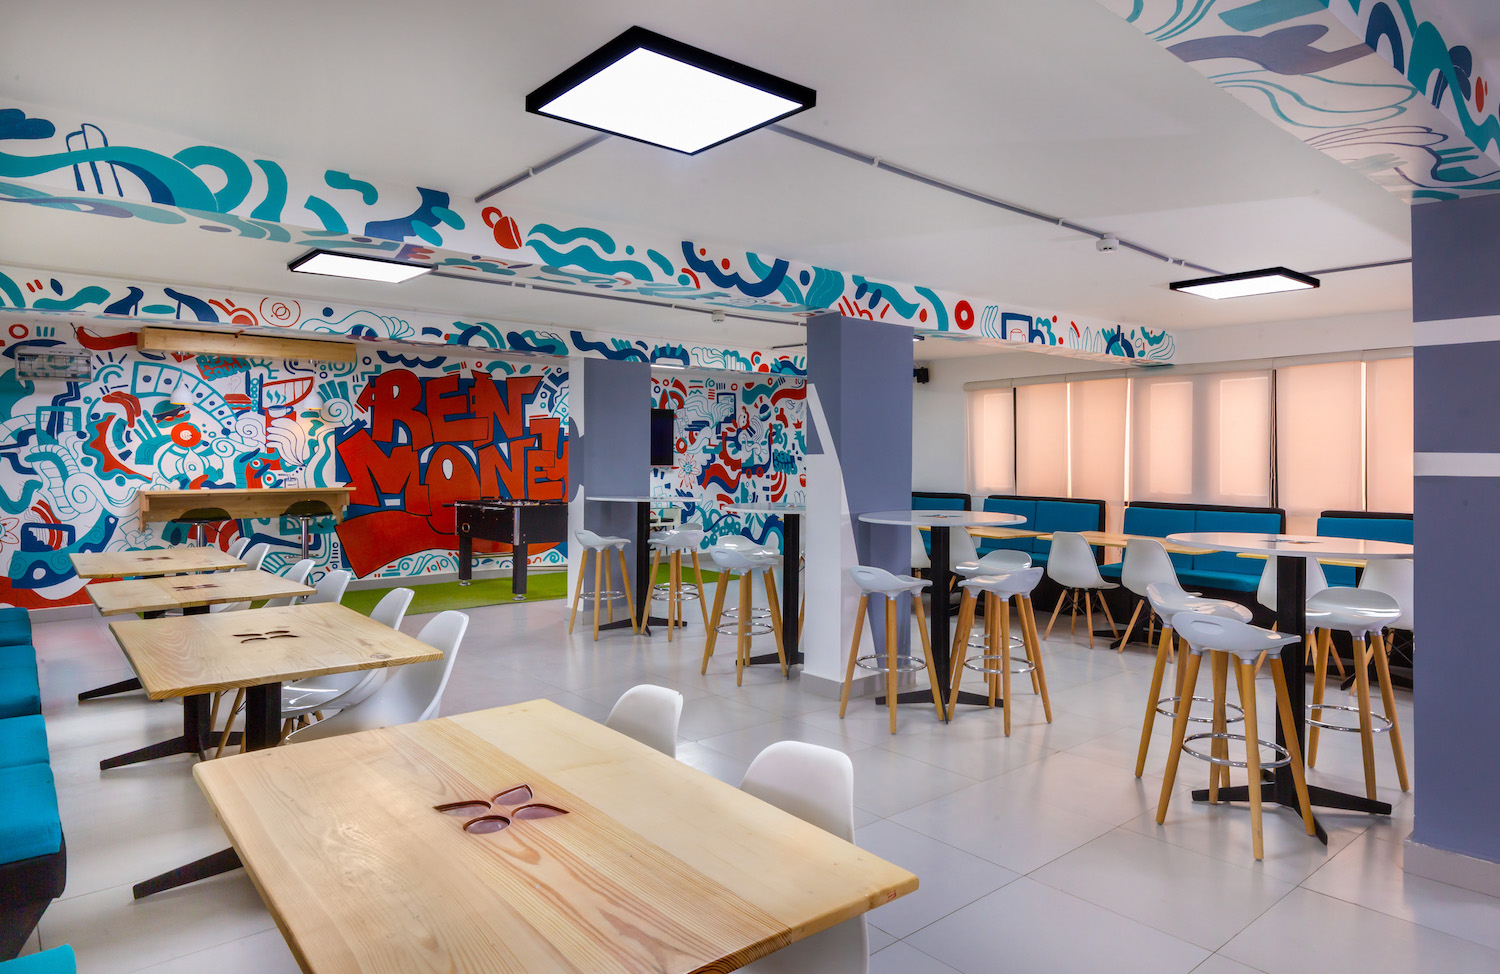 Spacefinish Unveils New Office Space for Renmoney